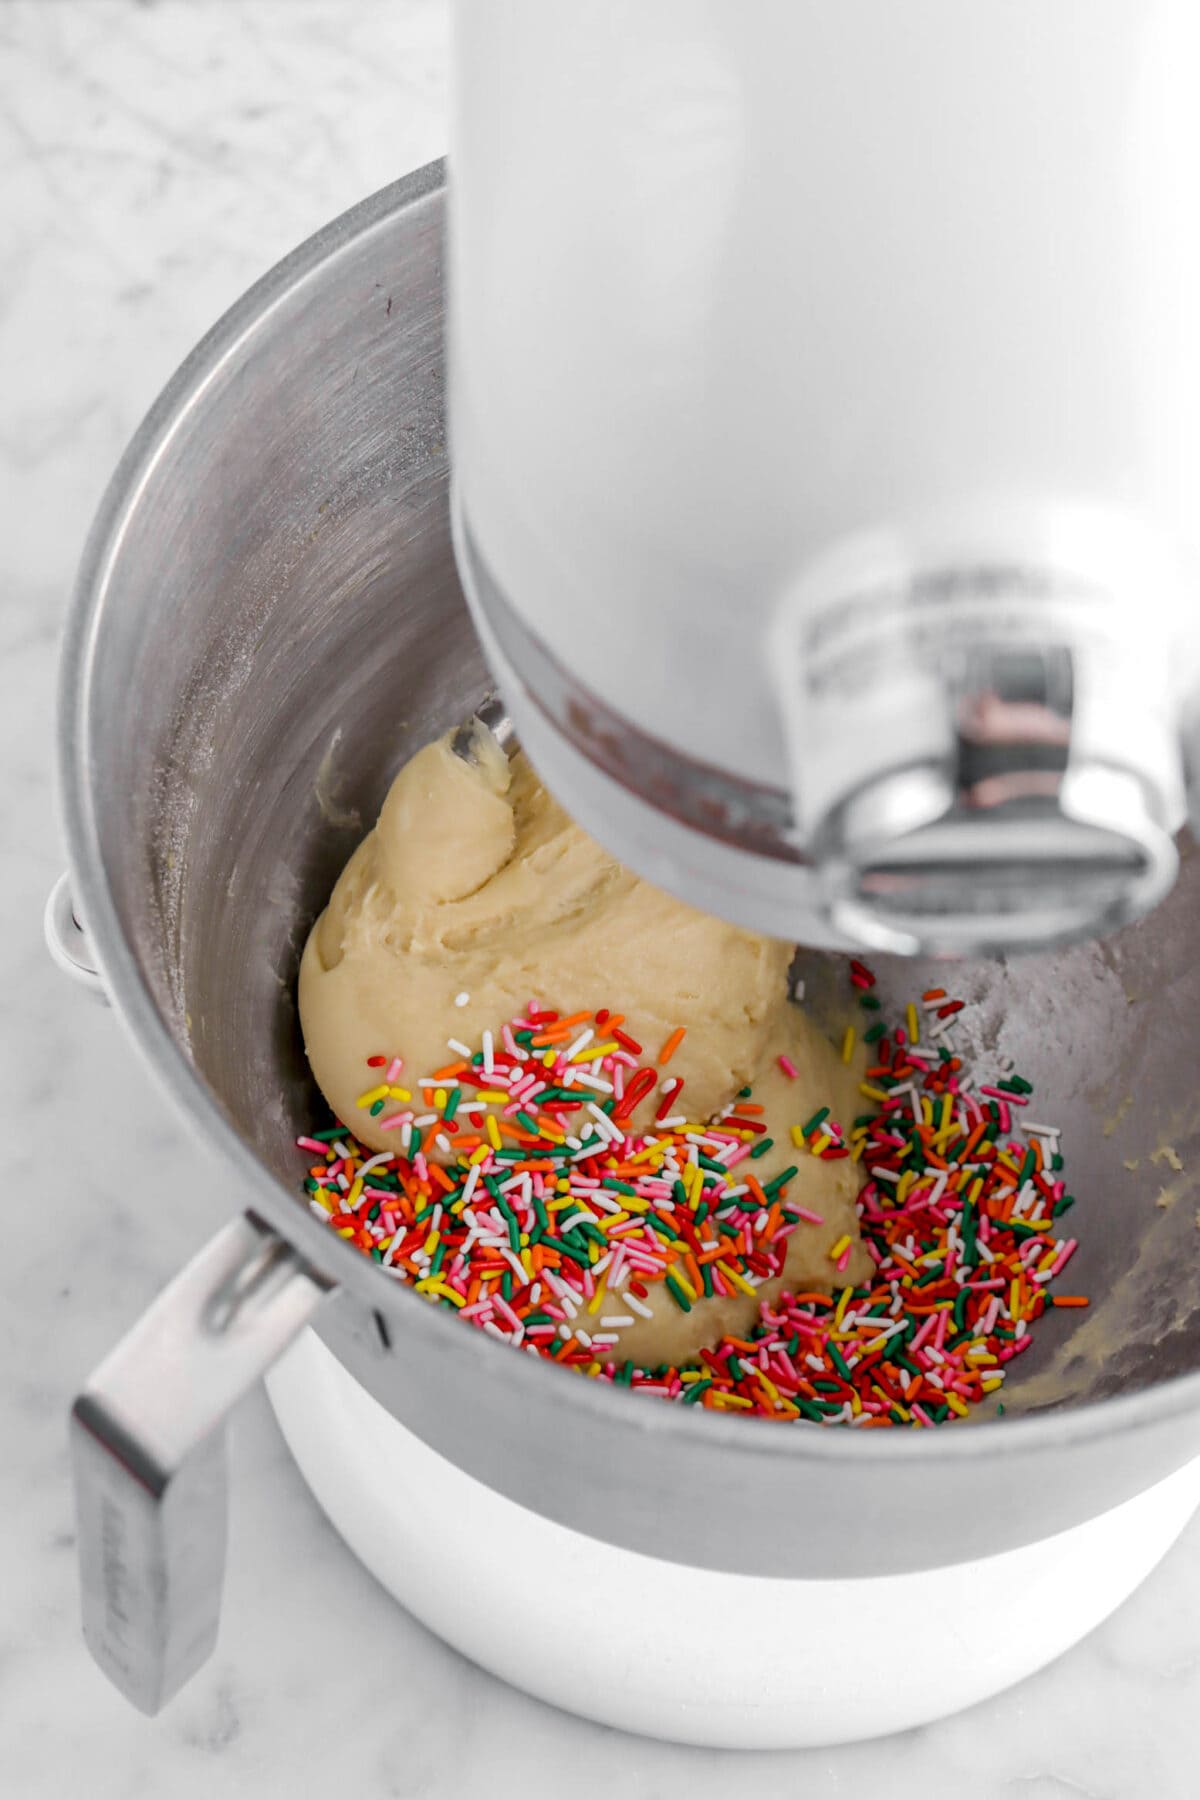 sprinkles added to dough.